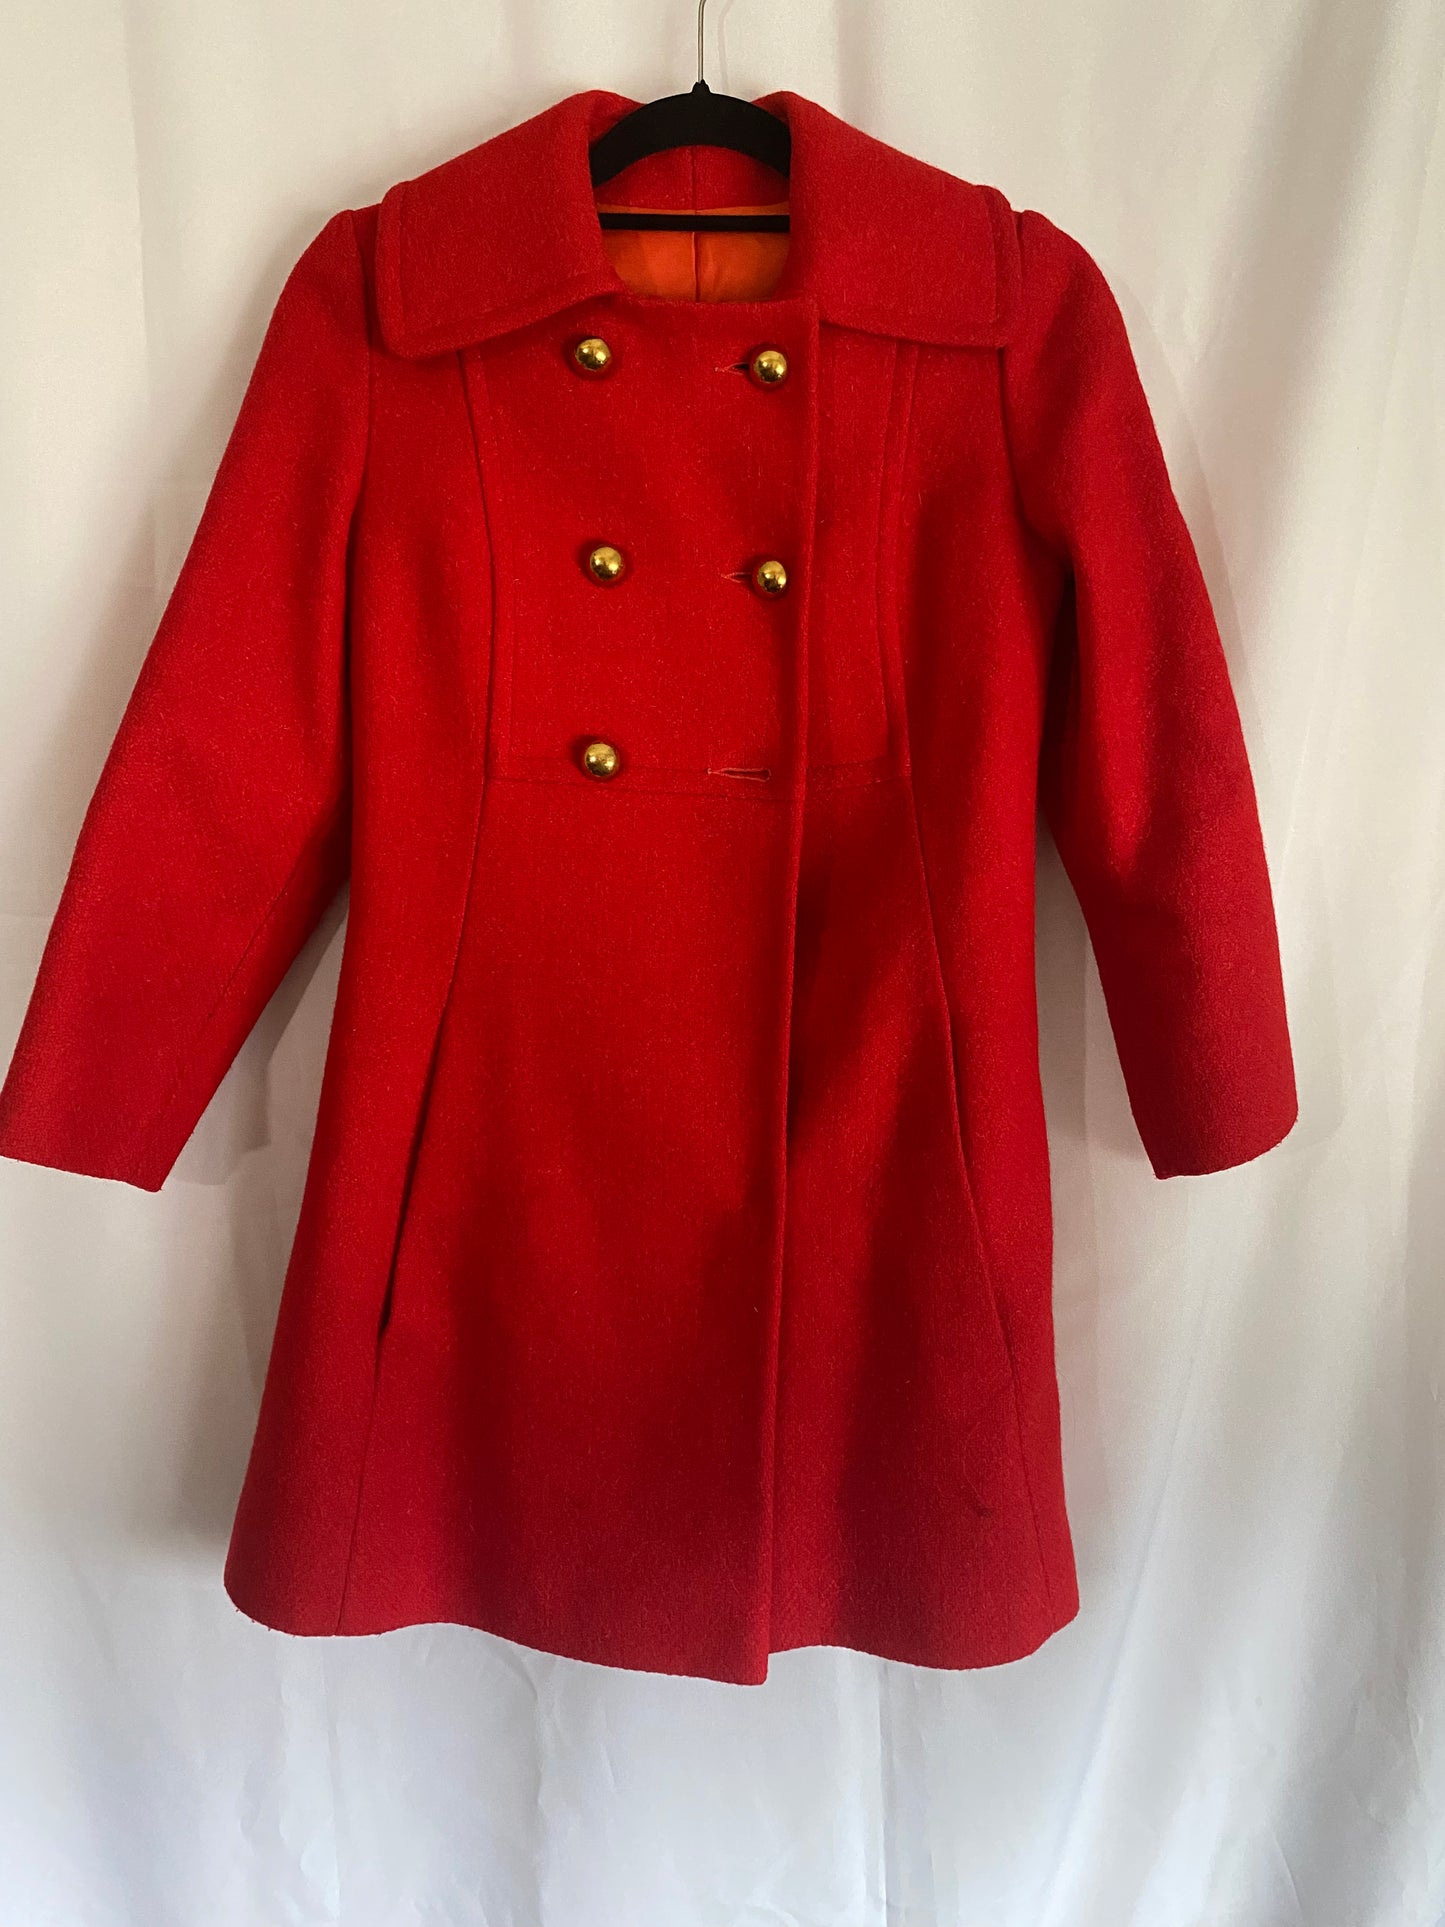 1950's Tomato Red Jacket